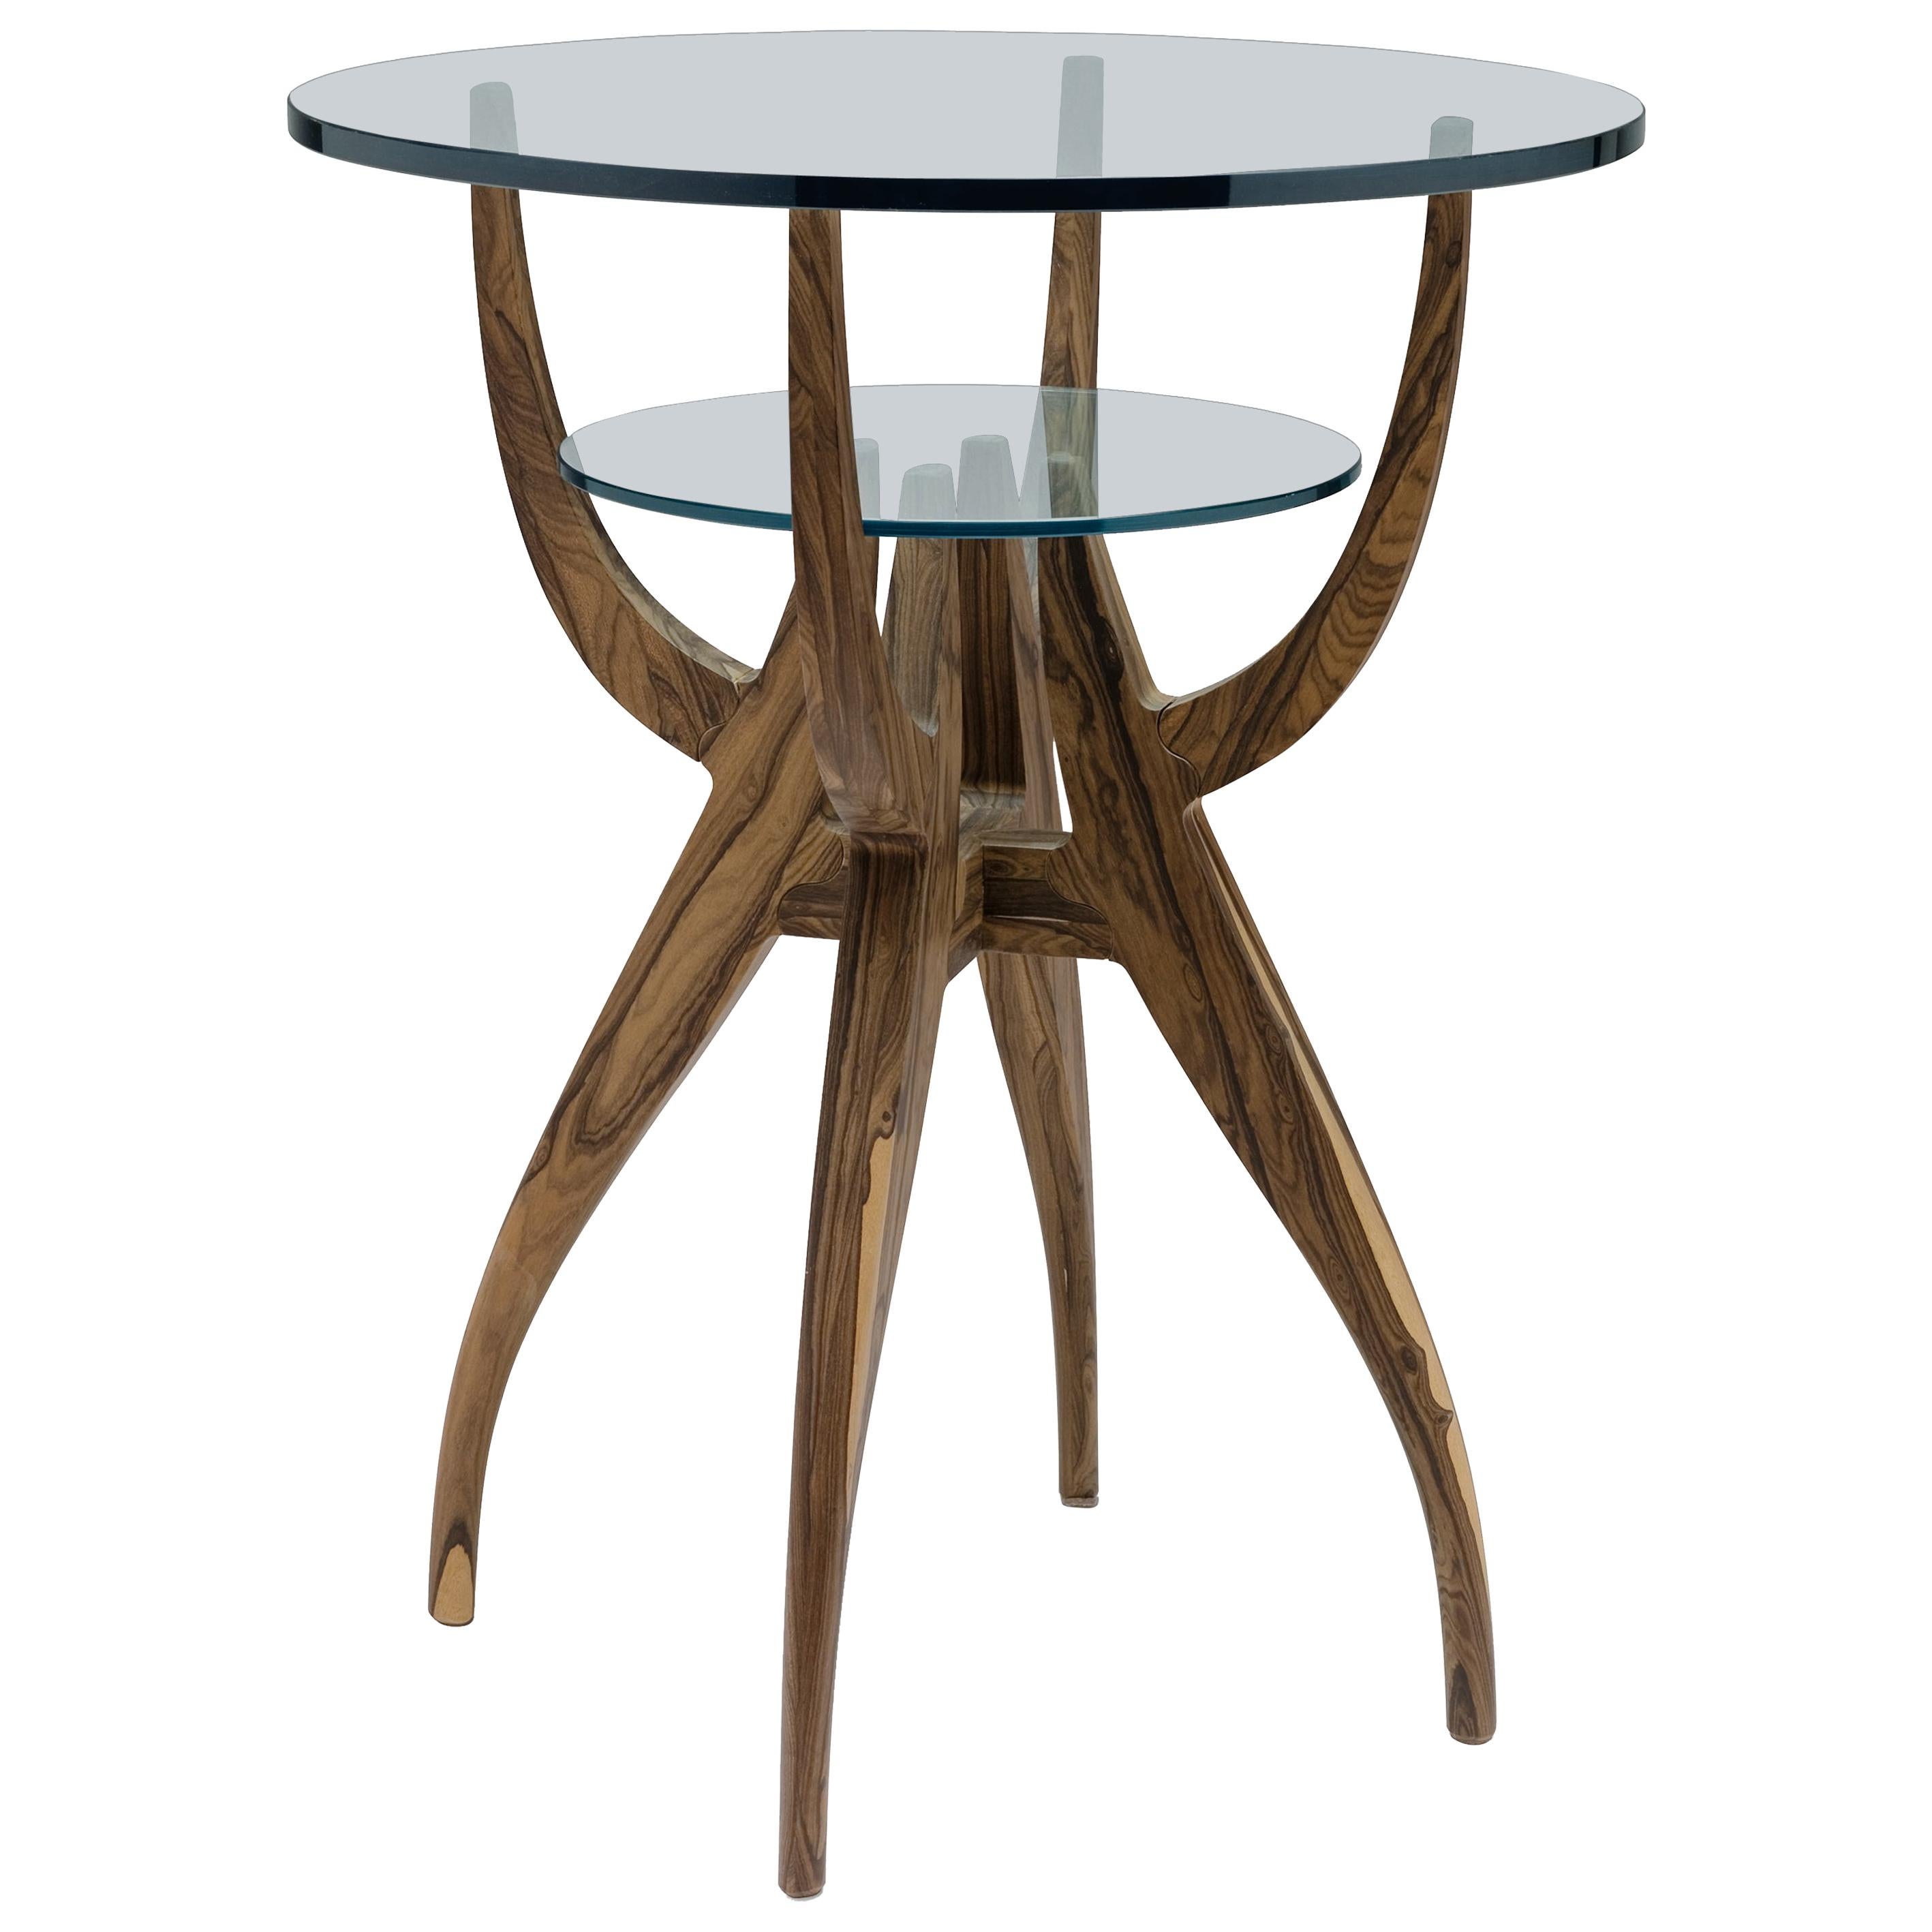 STAG/G Bar table in Solid Walnut and Glass Tops designed by Nigel Coats